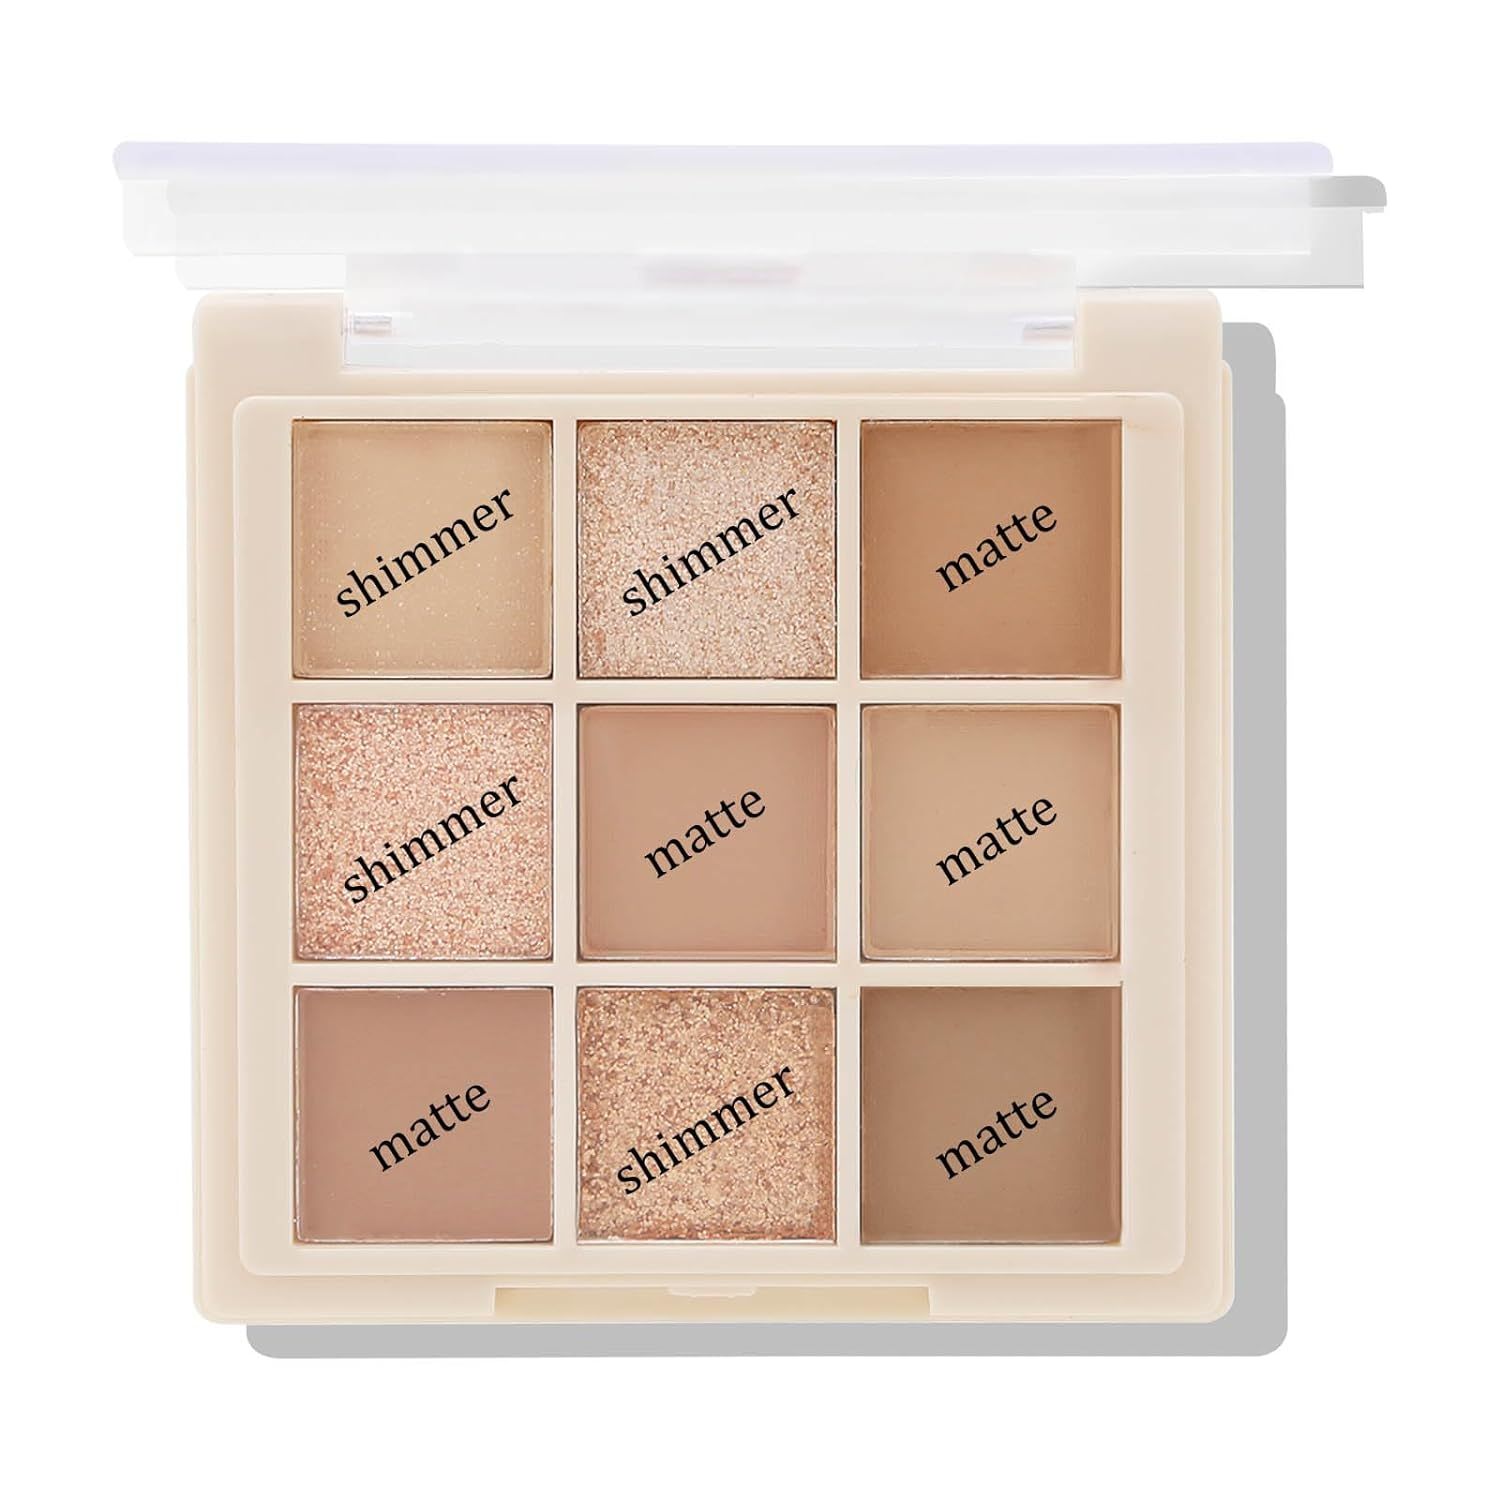 Boobeen Nude Eyeshadow Palette - Matte and Shimmer Makeup, Highly Pigmented Creamy Eye Shadow Pow... | Amazon (US)